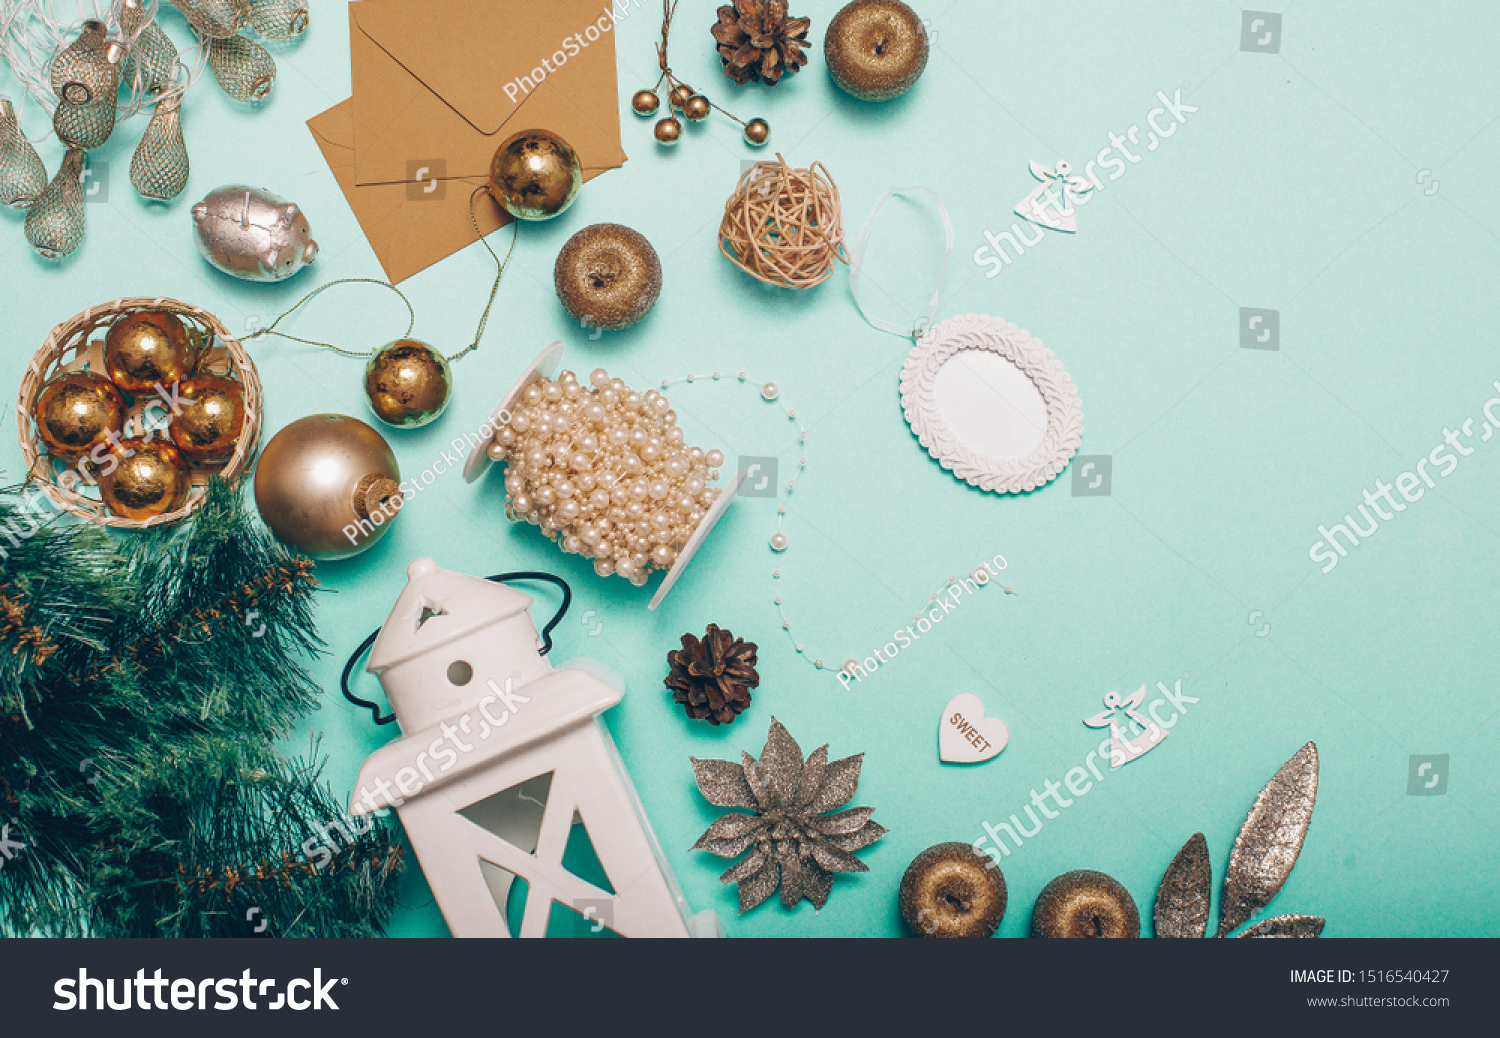 Merry Christmas Happy New Year Craftsman Stock Photo Edit Now